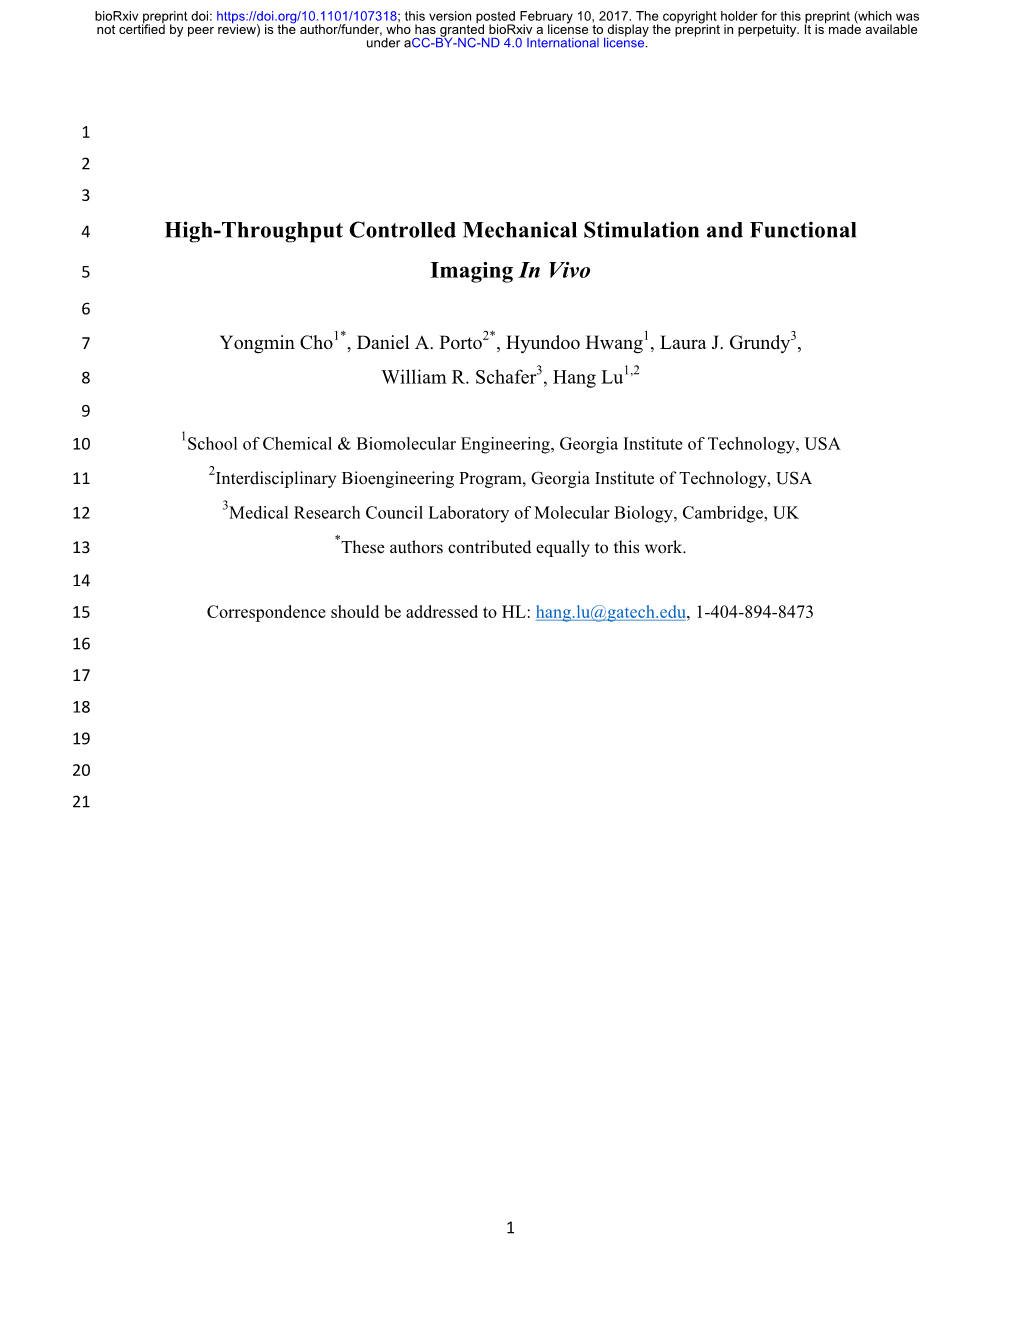 High-Throughput Controlled Mechanical Stimulation and Functional